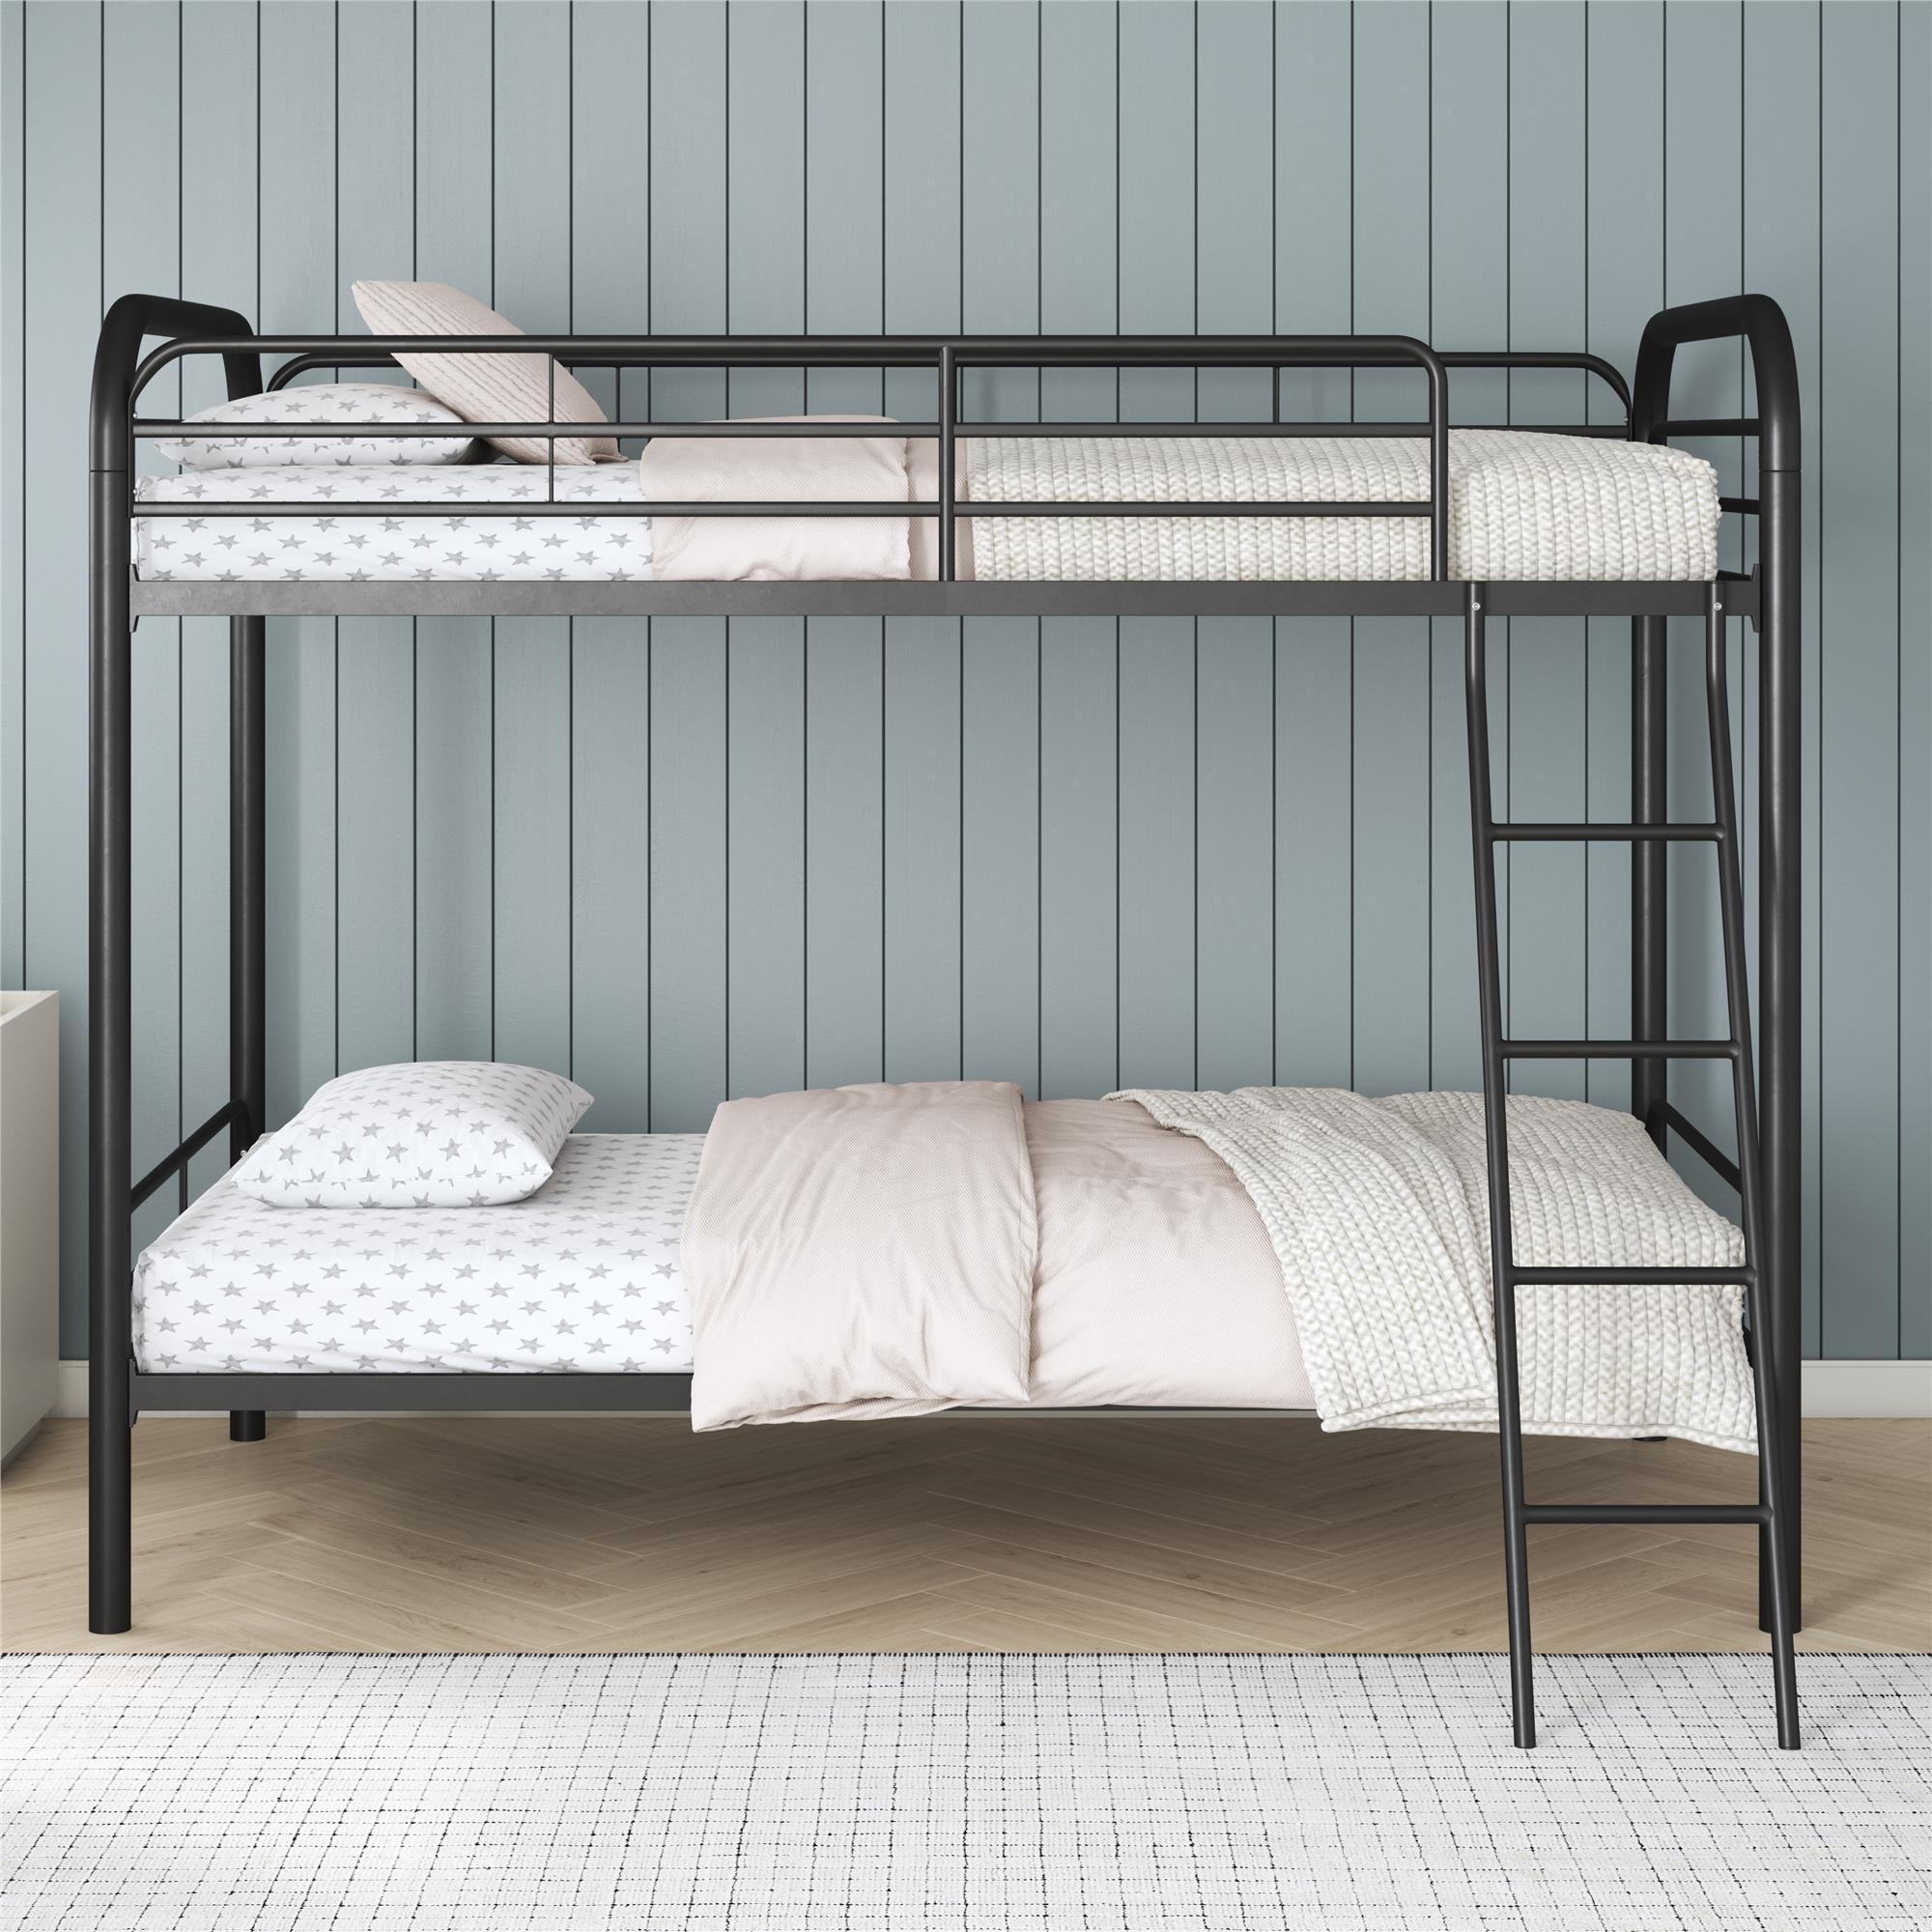 DHP Dusty Twin over Twin Metal Bunk Bed with Secured Ladder, Black - image 1 of 9